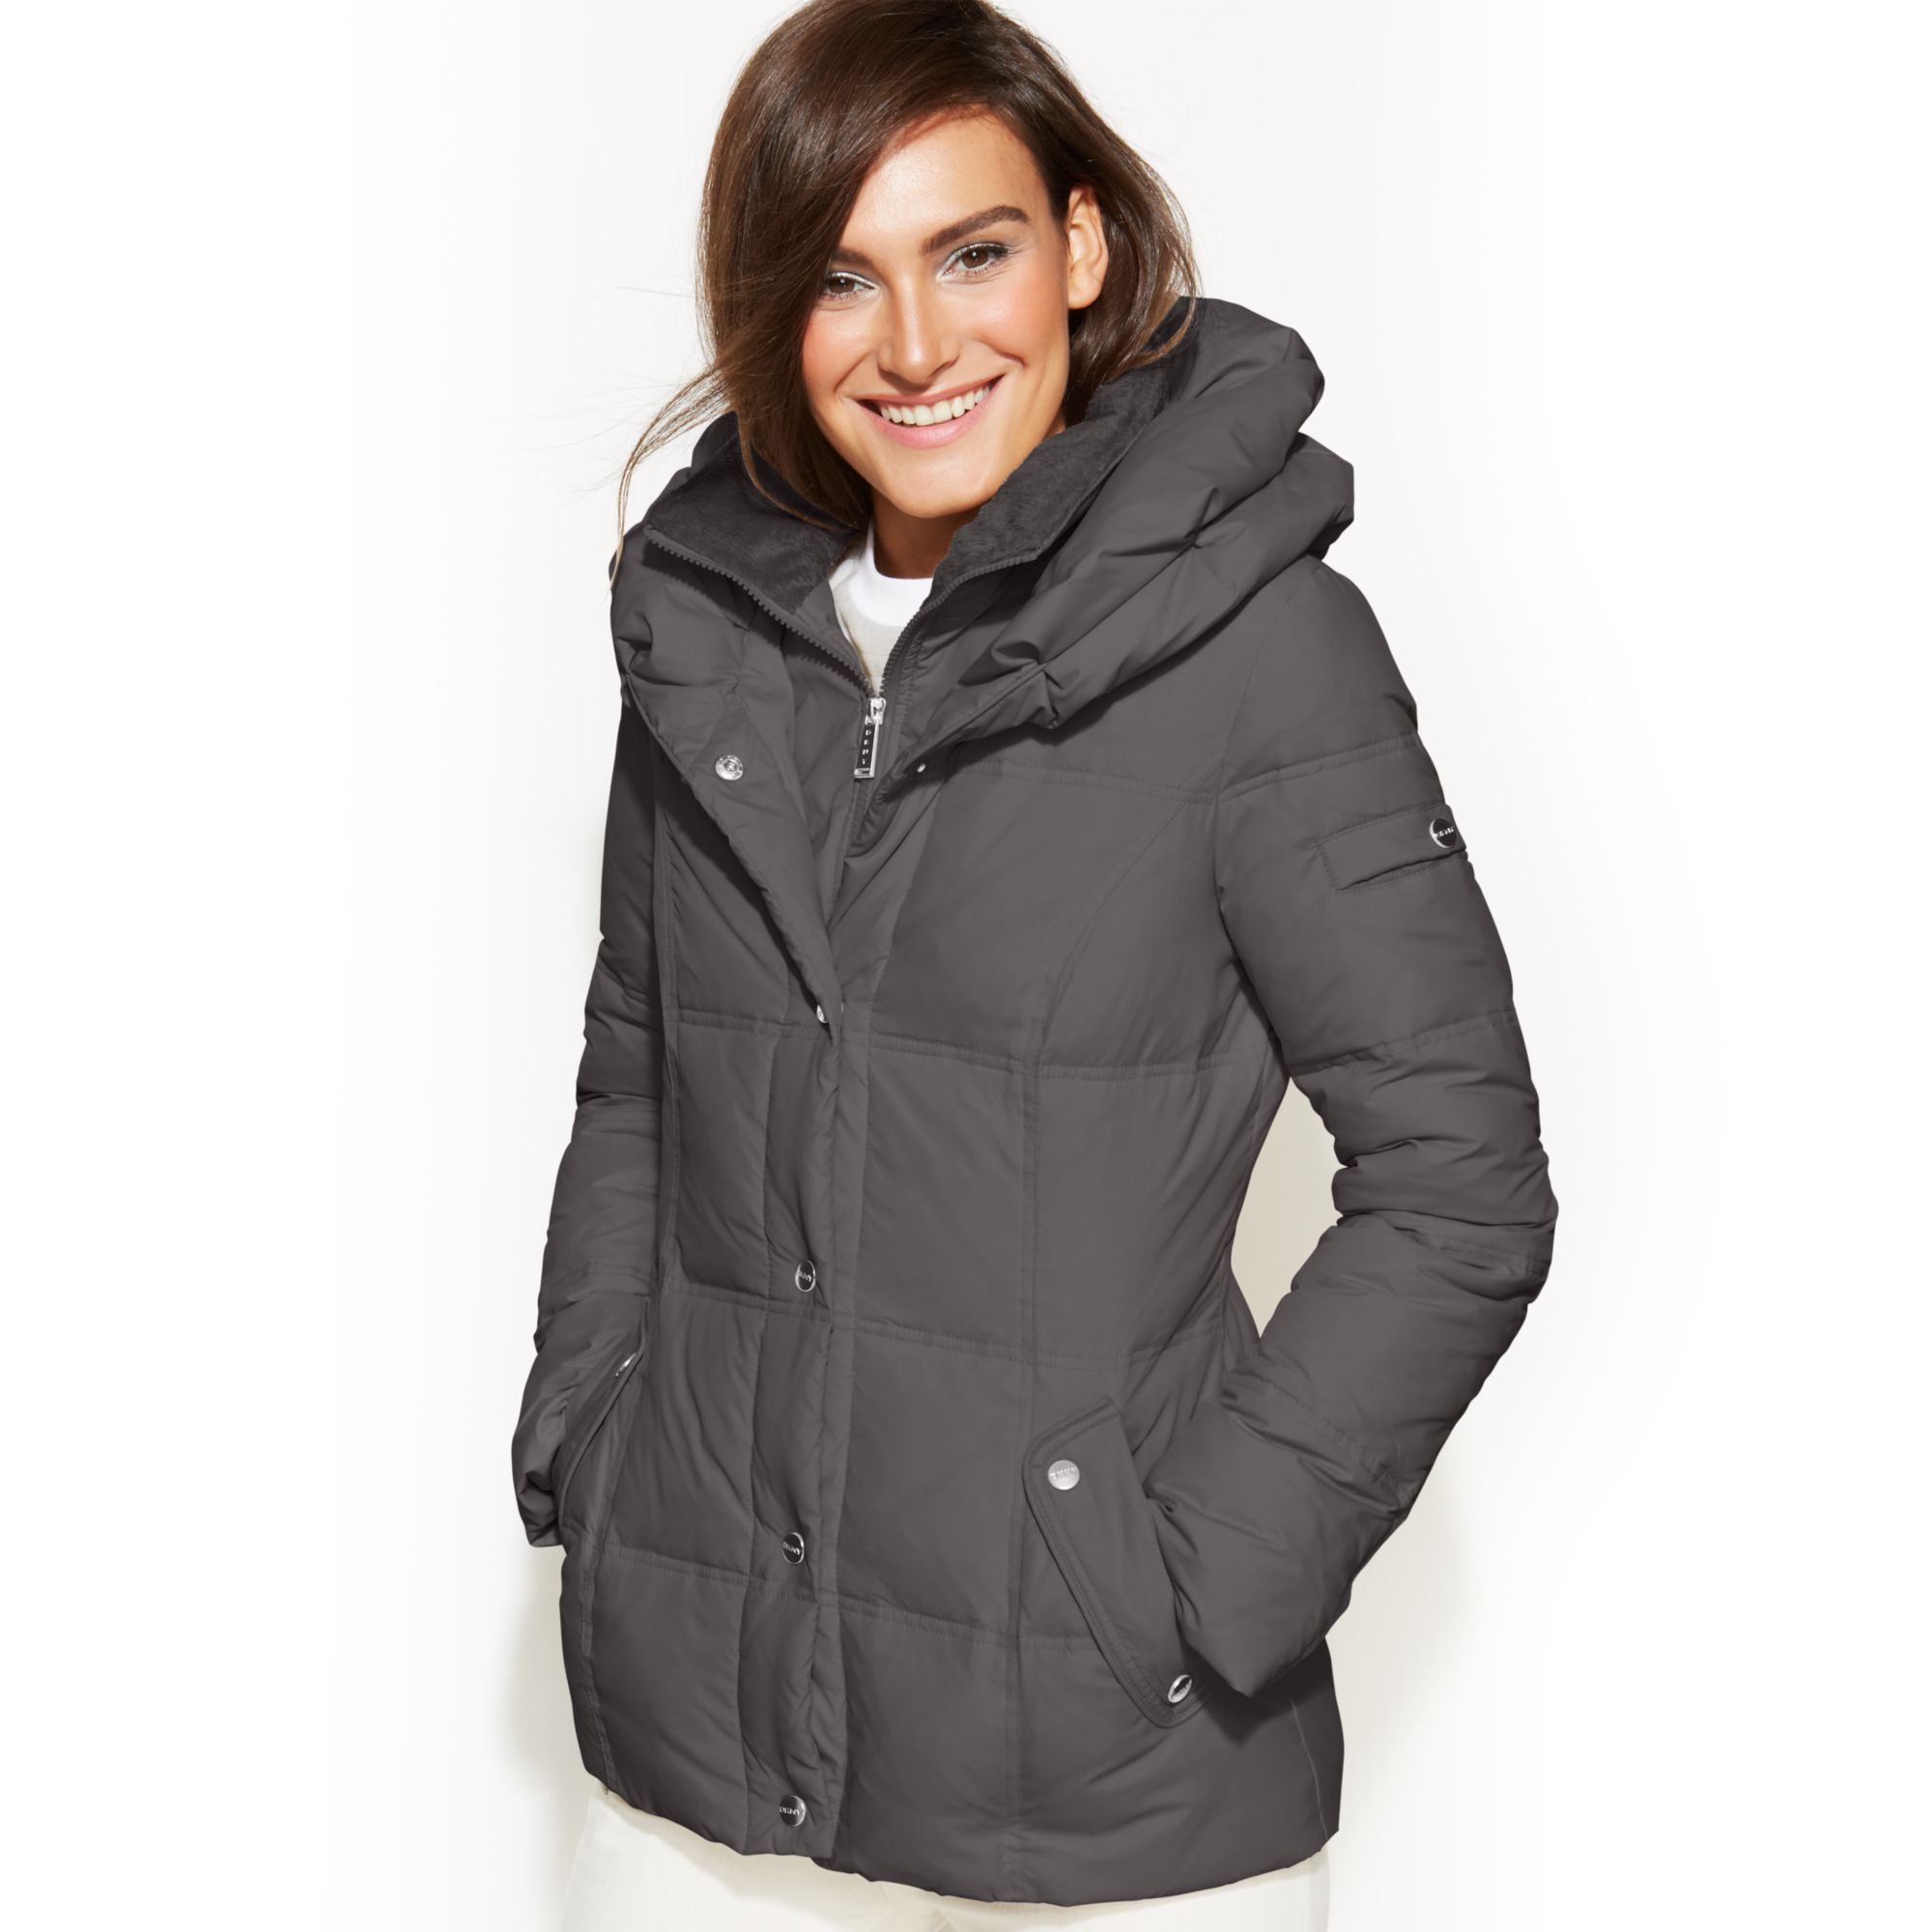 Lyst - Dkny Pillow Collar Down Puffer Coat in Gray